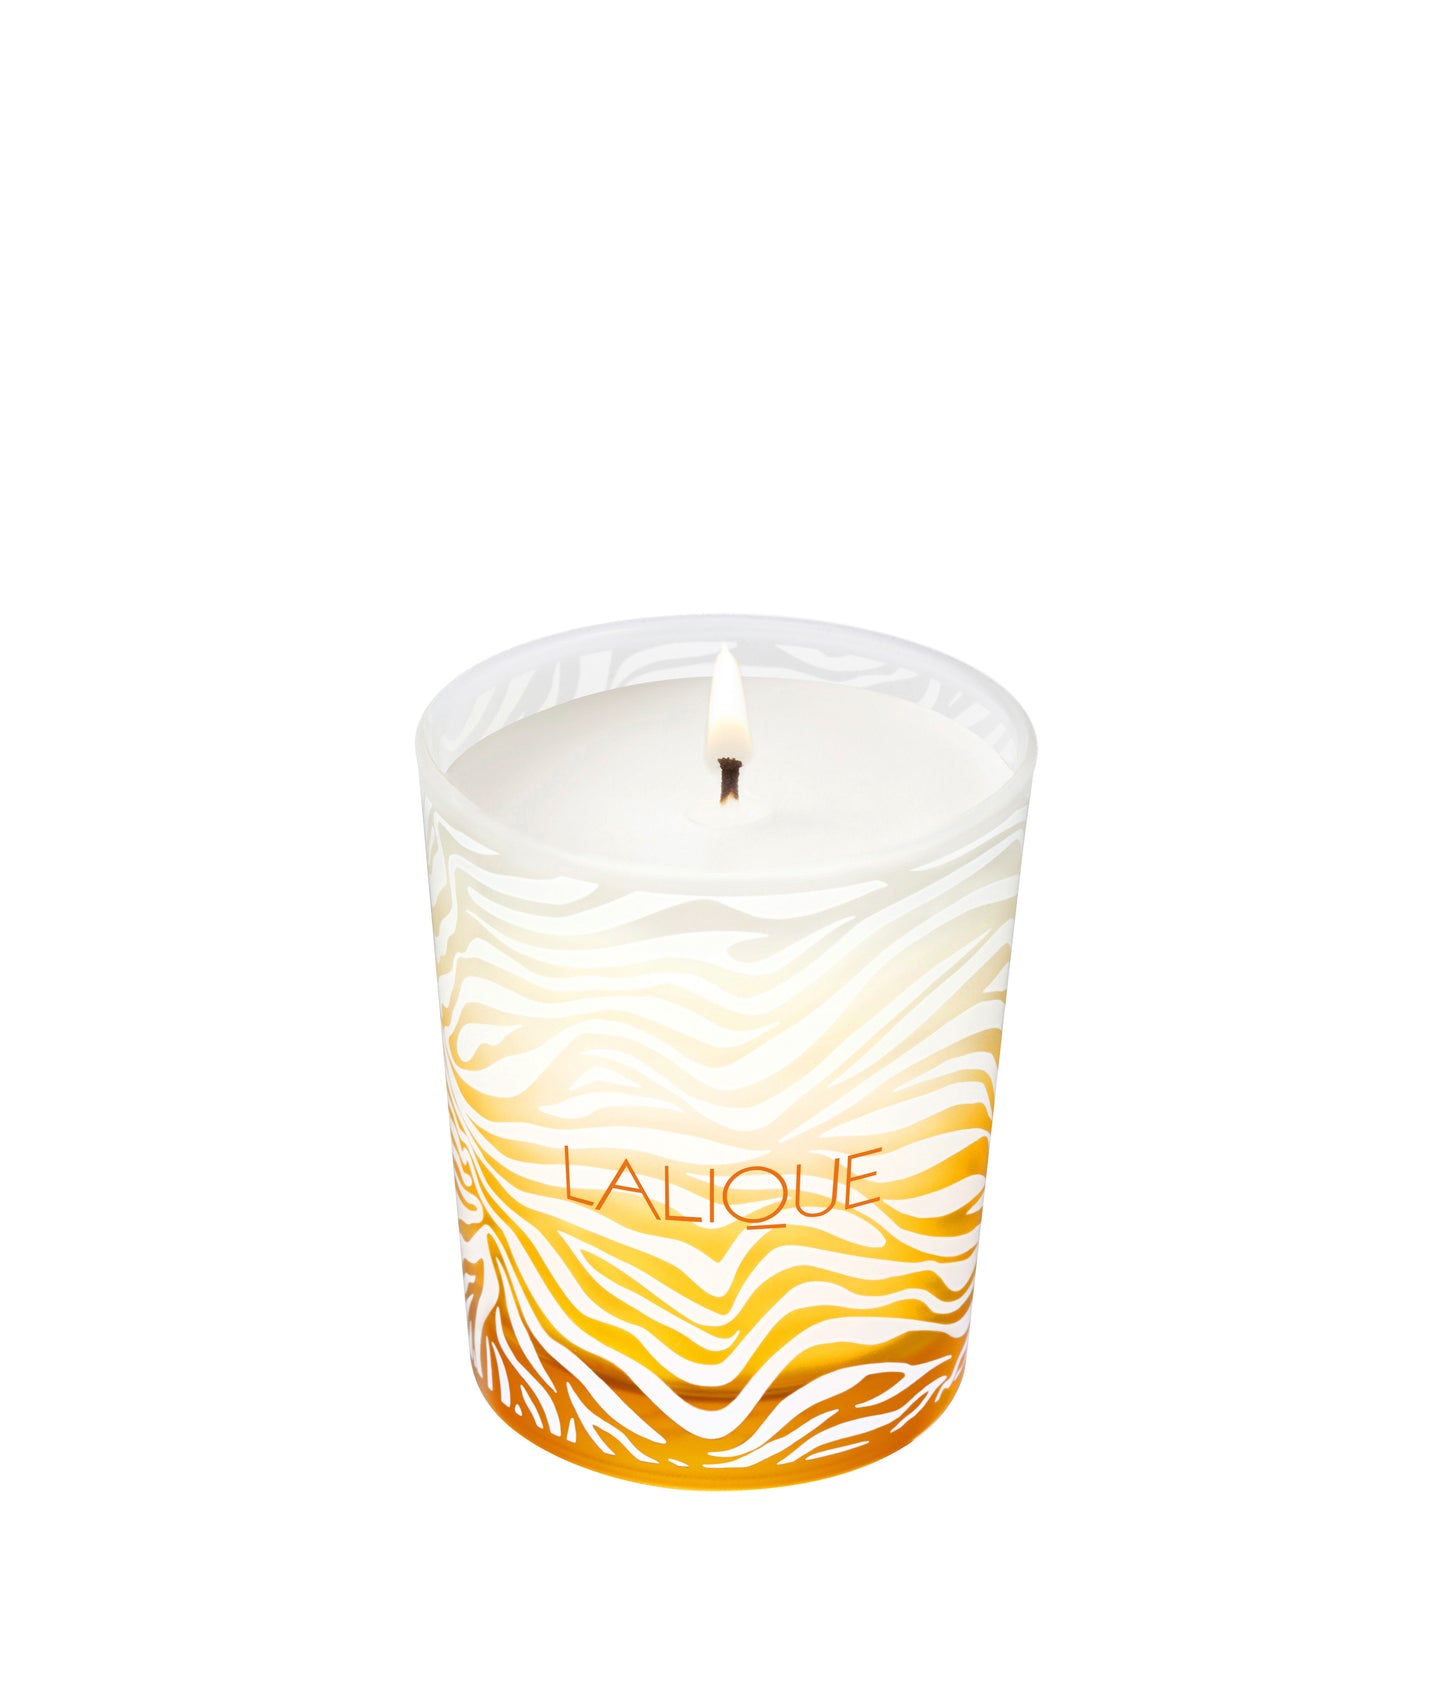 CANDLE 190G "LE SOLEIL, CHIANG MAI" LE SOLEIL COLLECTION - EASTERN SCENT